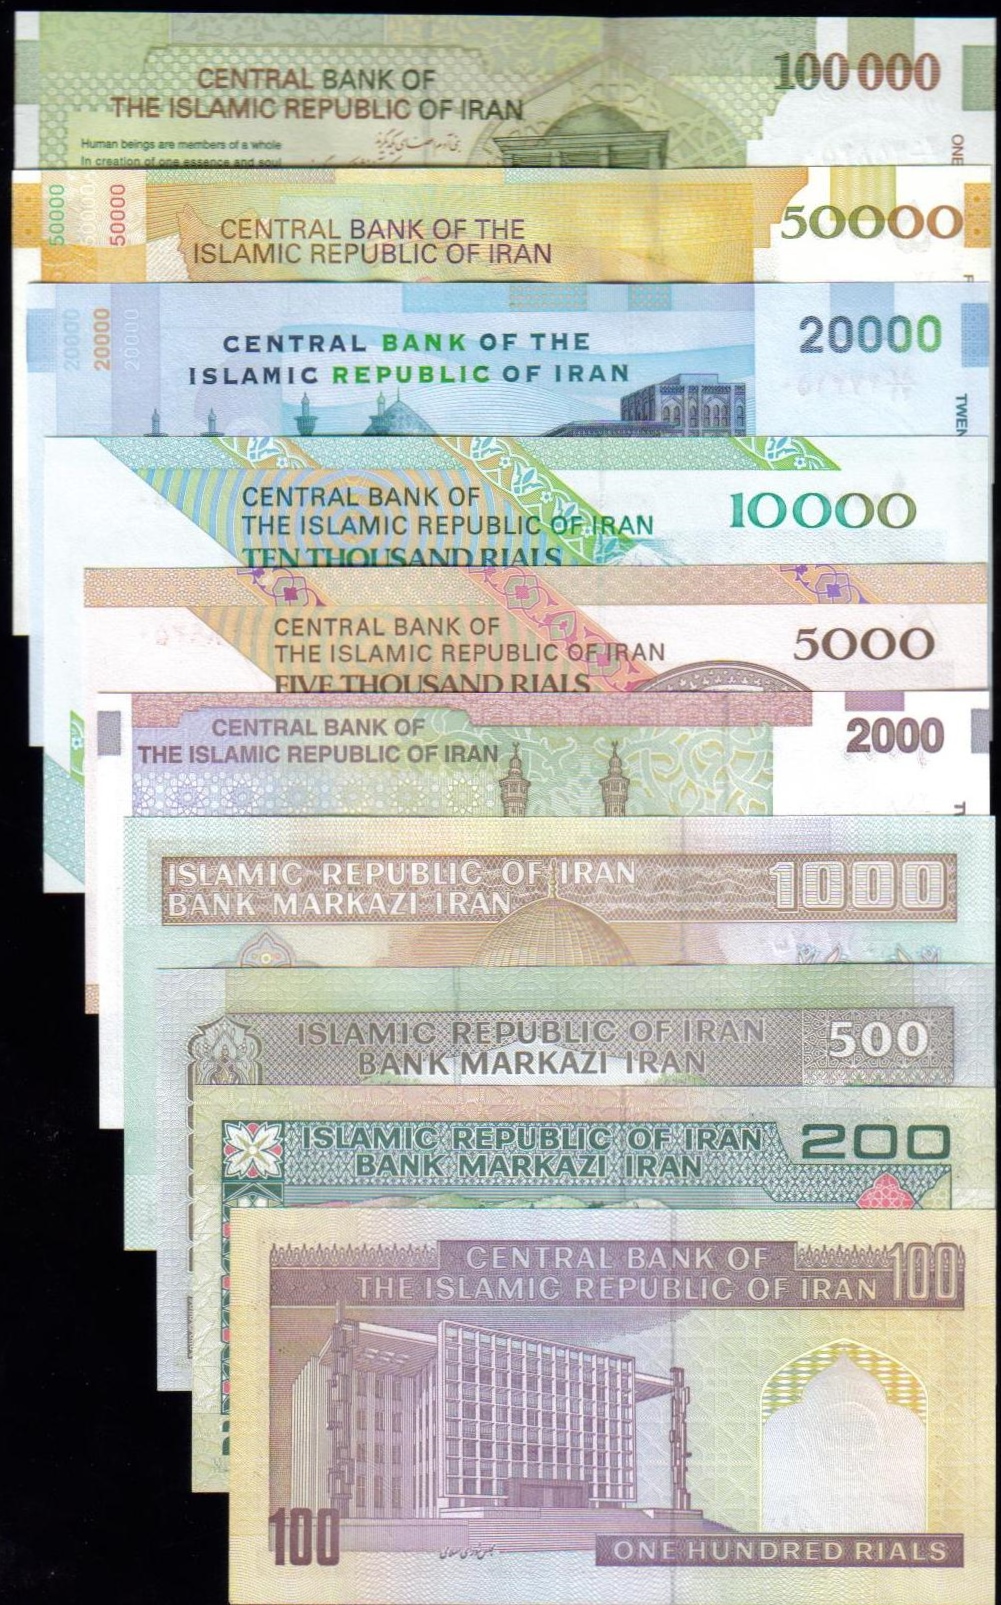 <font 130><font color=red><b>Set of 10 Banknotes </font></b><p>This is a complete set of current banknotes of Iran from 100 Rial to 100,000 Rial.  This is a nice way of having a sample of each denominations.  Most low values are no longer printed, and fetch $1 to $5.00 each. <p><a href="/shop/catalog/images/Iran-Set-of-10.jpg"><font color=blue>(Click to see the fronts)Â </font></a>Â  <a href="/shop/catalog/images/Iran-Set-of-10-Back.jpg"><font color=blue>(Click to see the backs)</font></a>